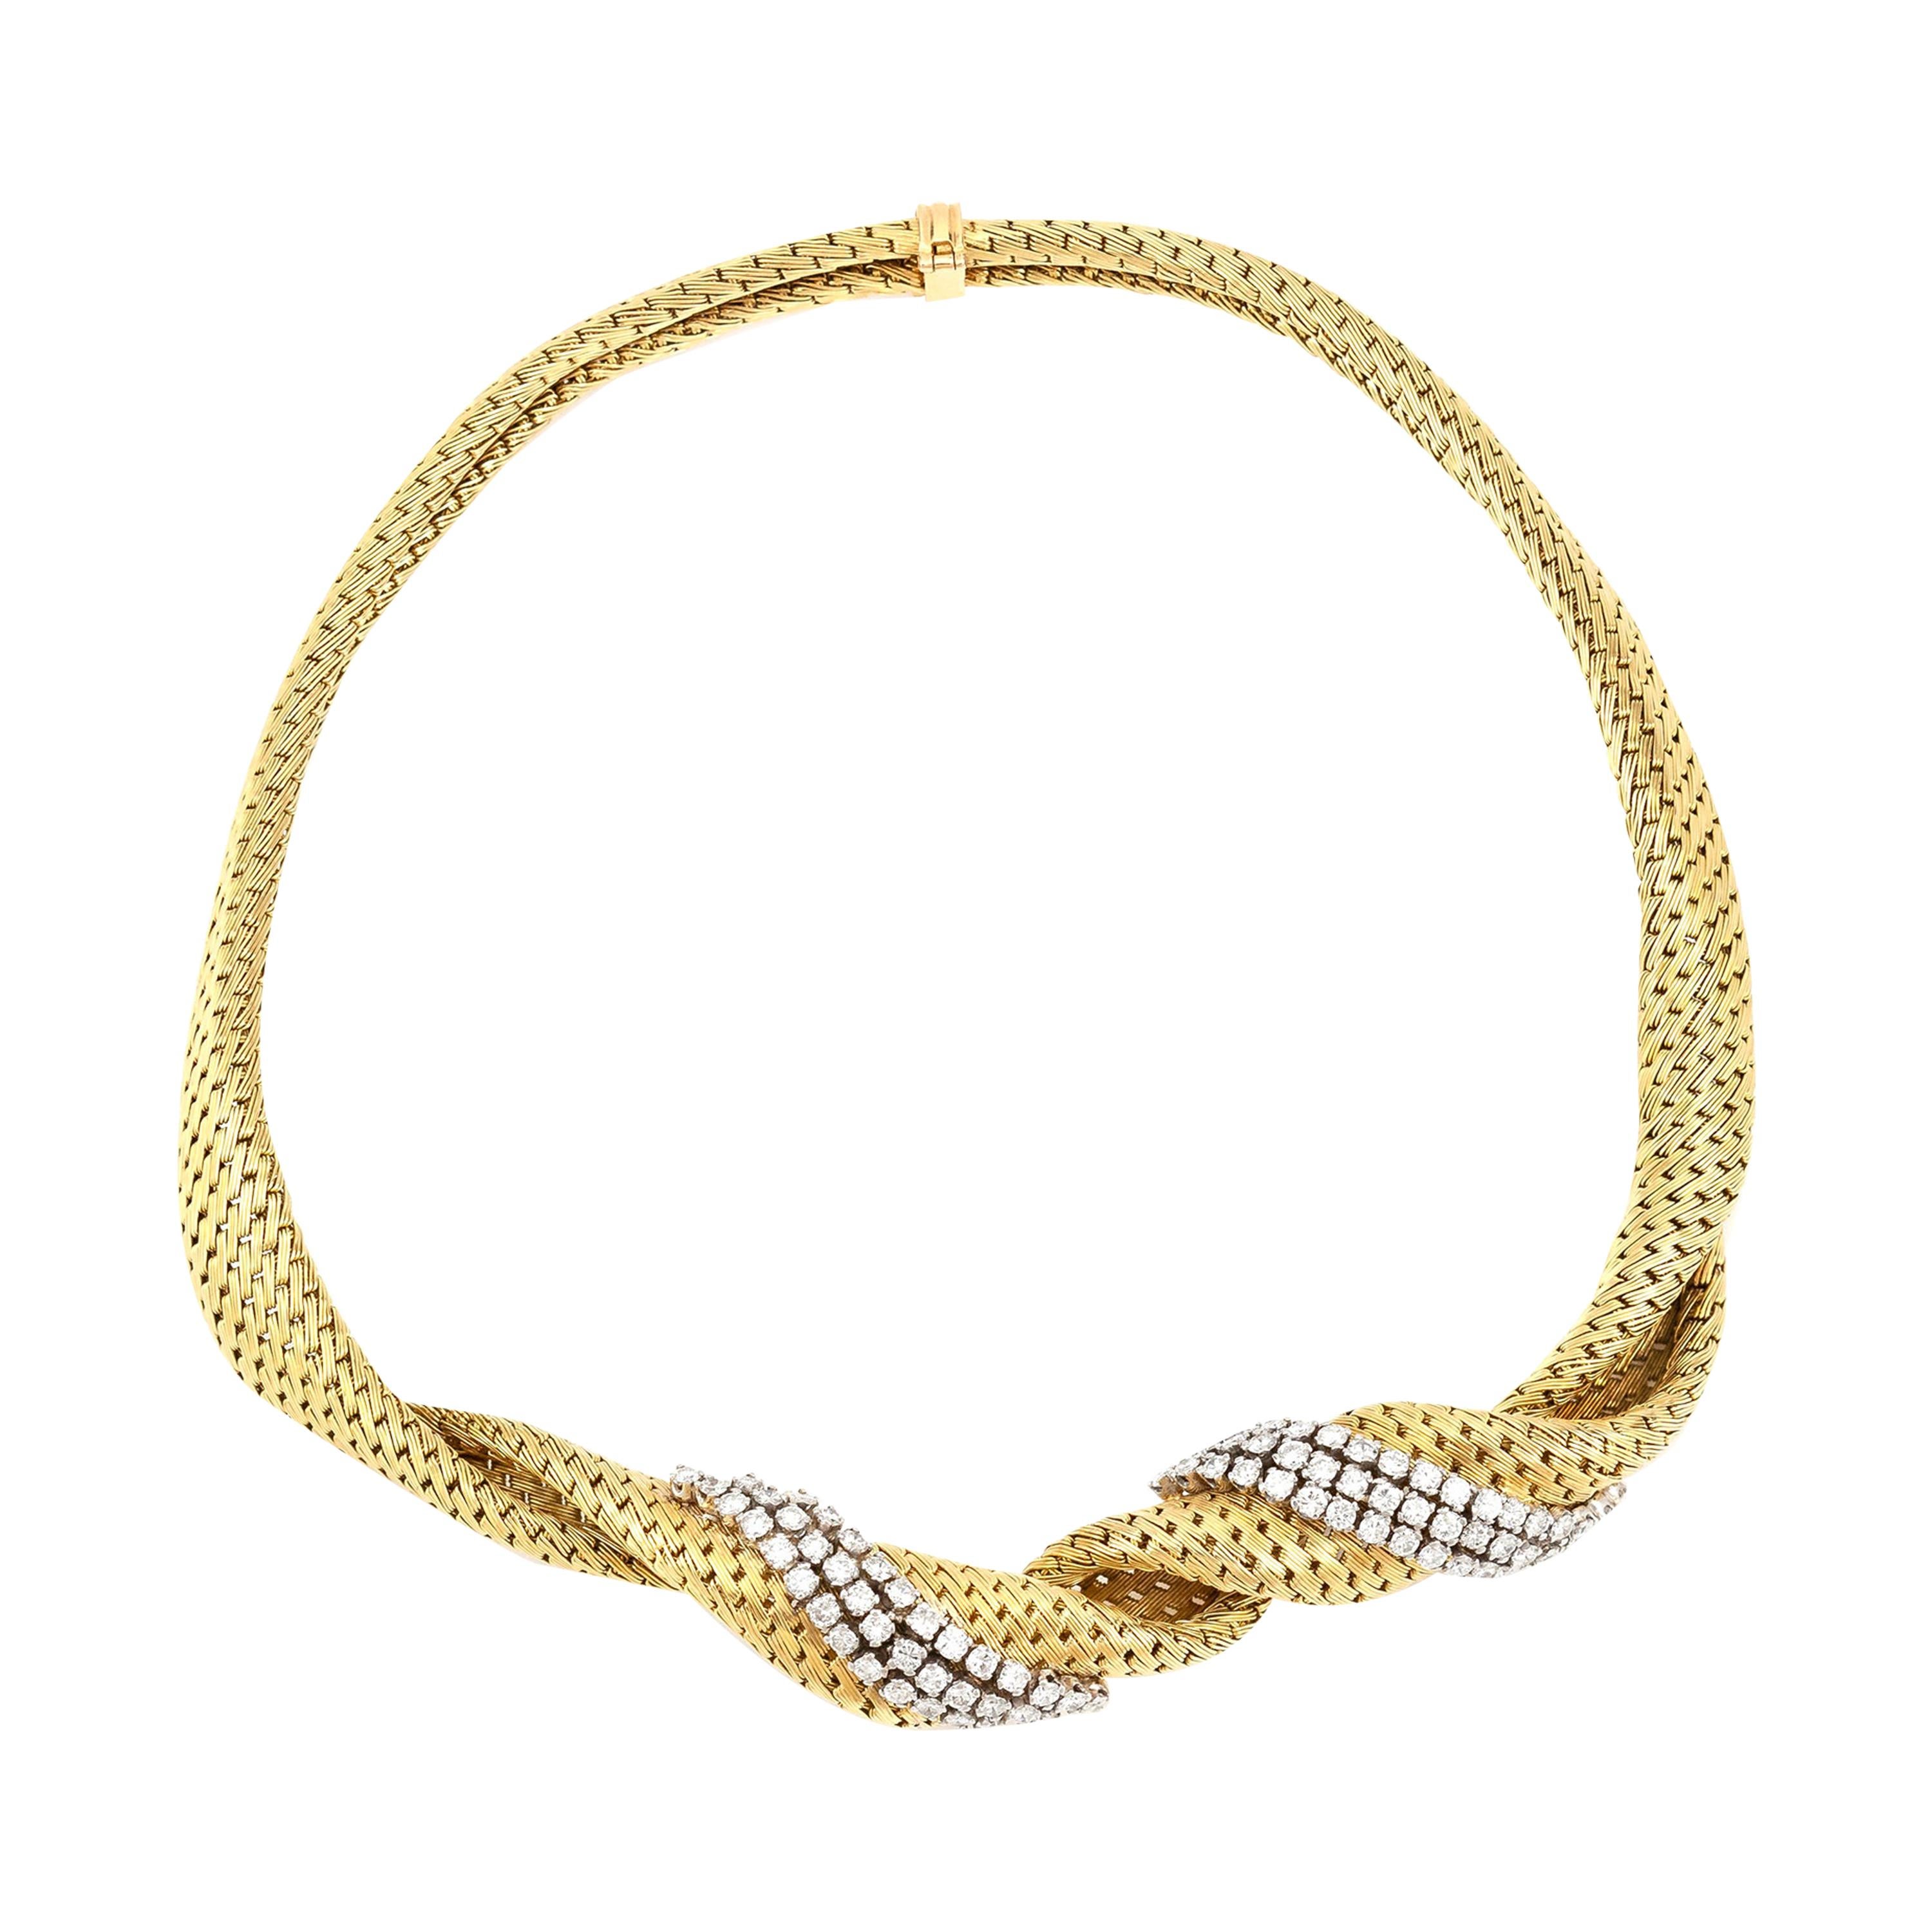 Beautiful 18 Karat Choker with Diamond Spiral in Front For Sale